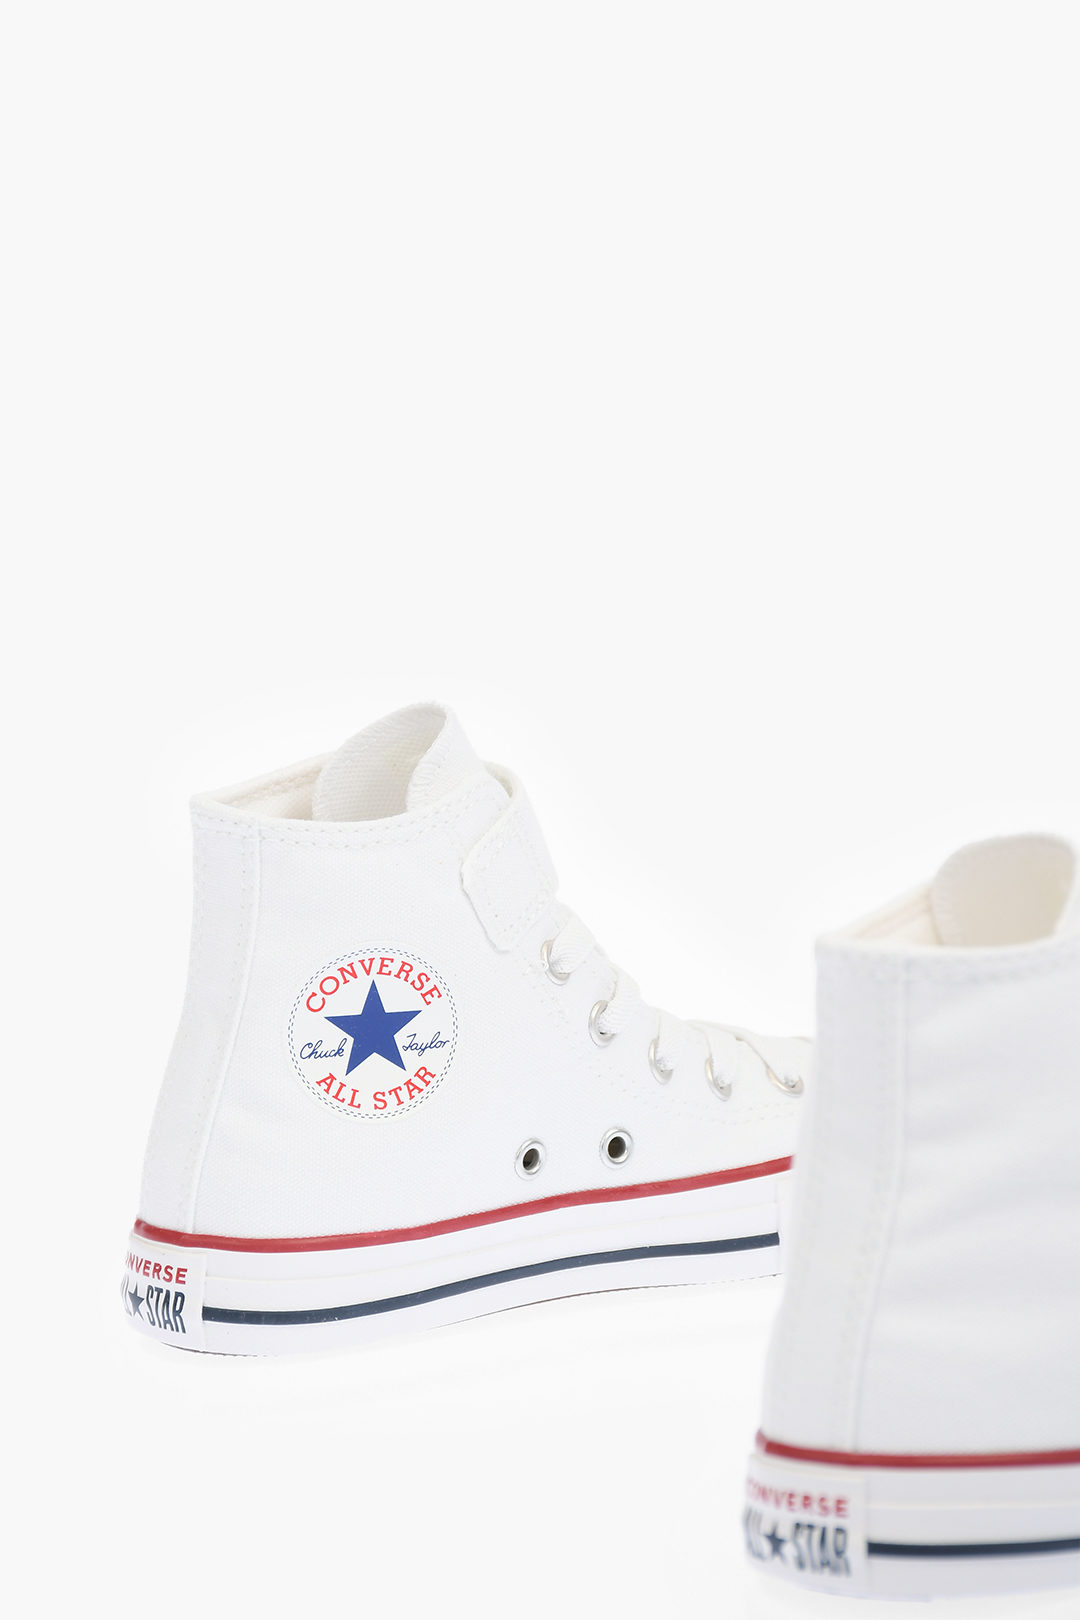 Converse KIDS ALL STAR CHUCK TAYLOR Fabric Sneakers unisex children boys  girls - Glamood Outlet